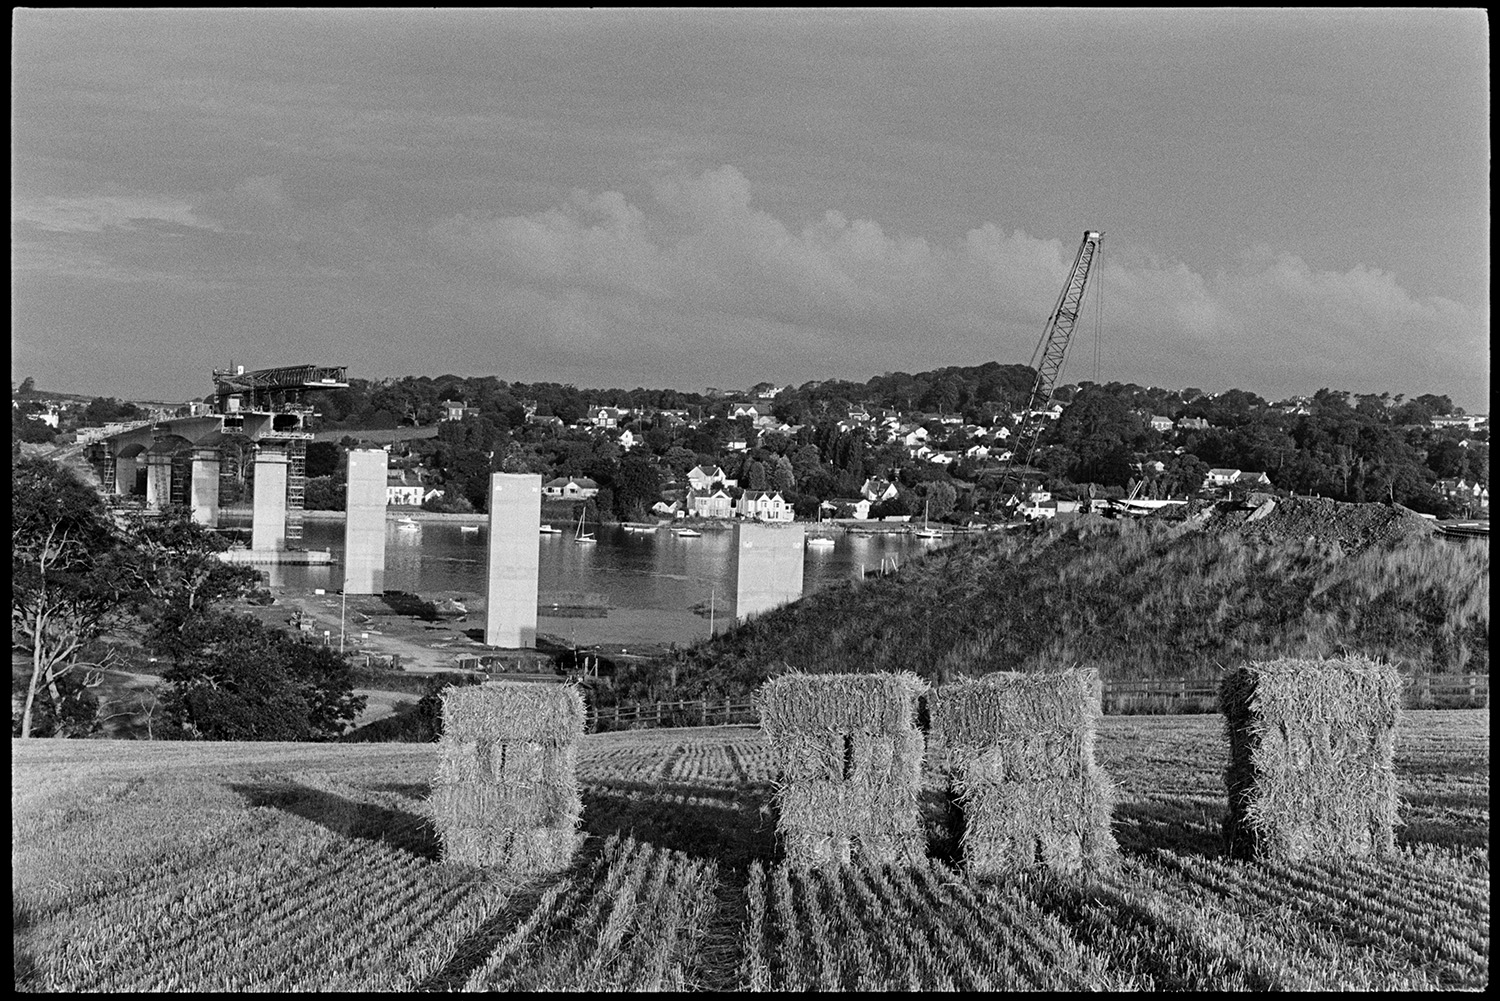 Bales of hay with bridge under construction in background.
[Straw bales standing in a field at Bideford with Bideford New Bridge being built over the River Torridge in the background.]